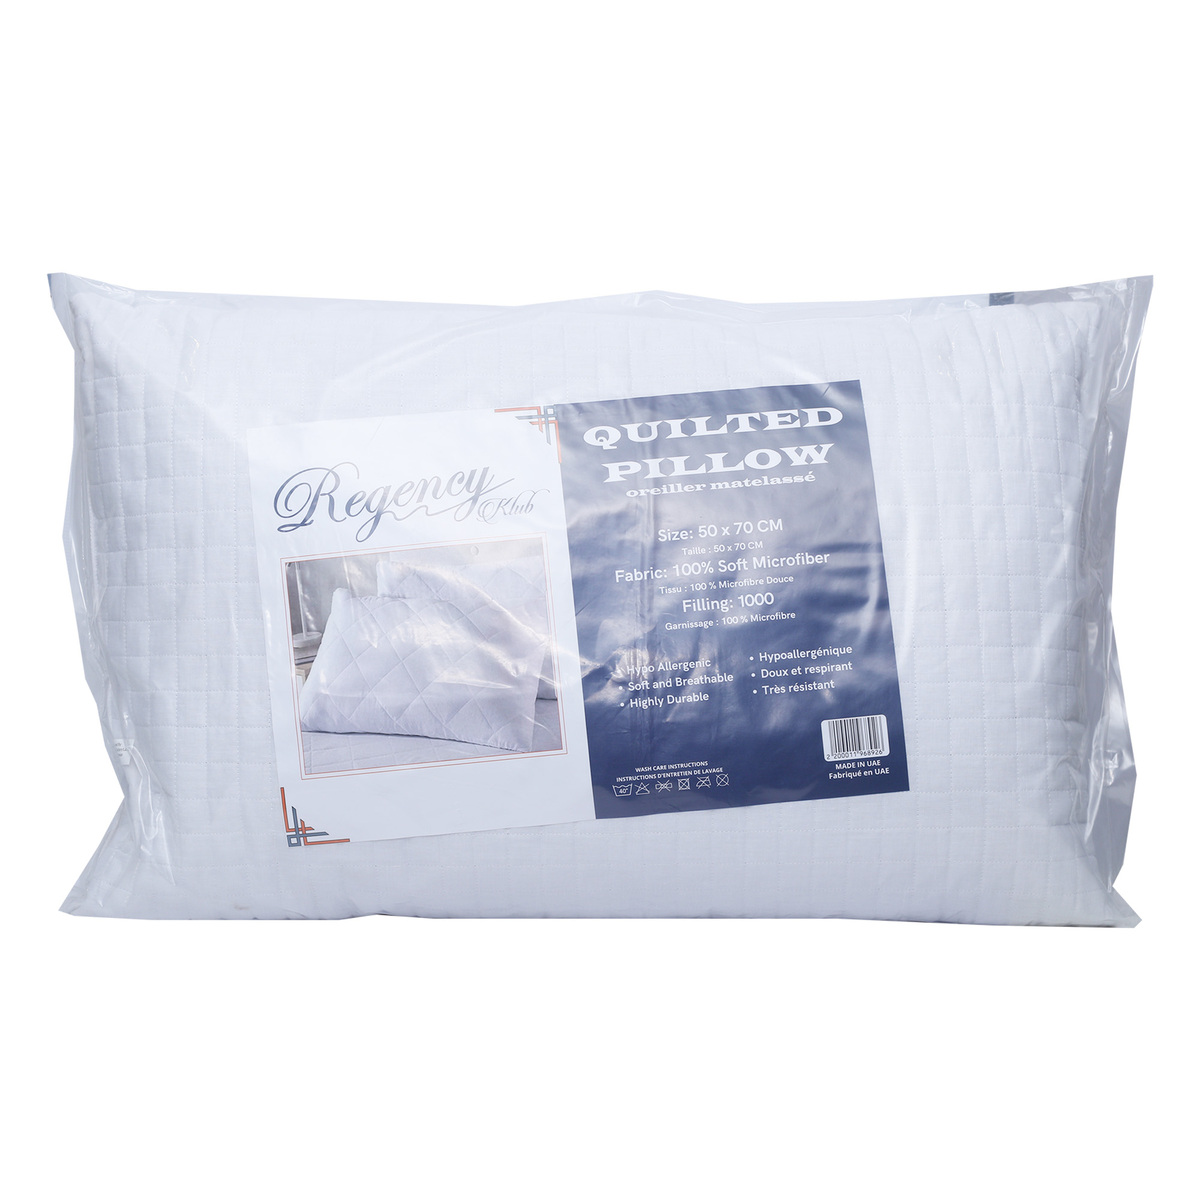 Regency Quilted Pillow 50 x 70cm